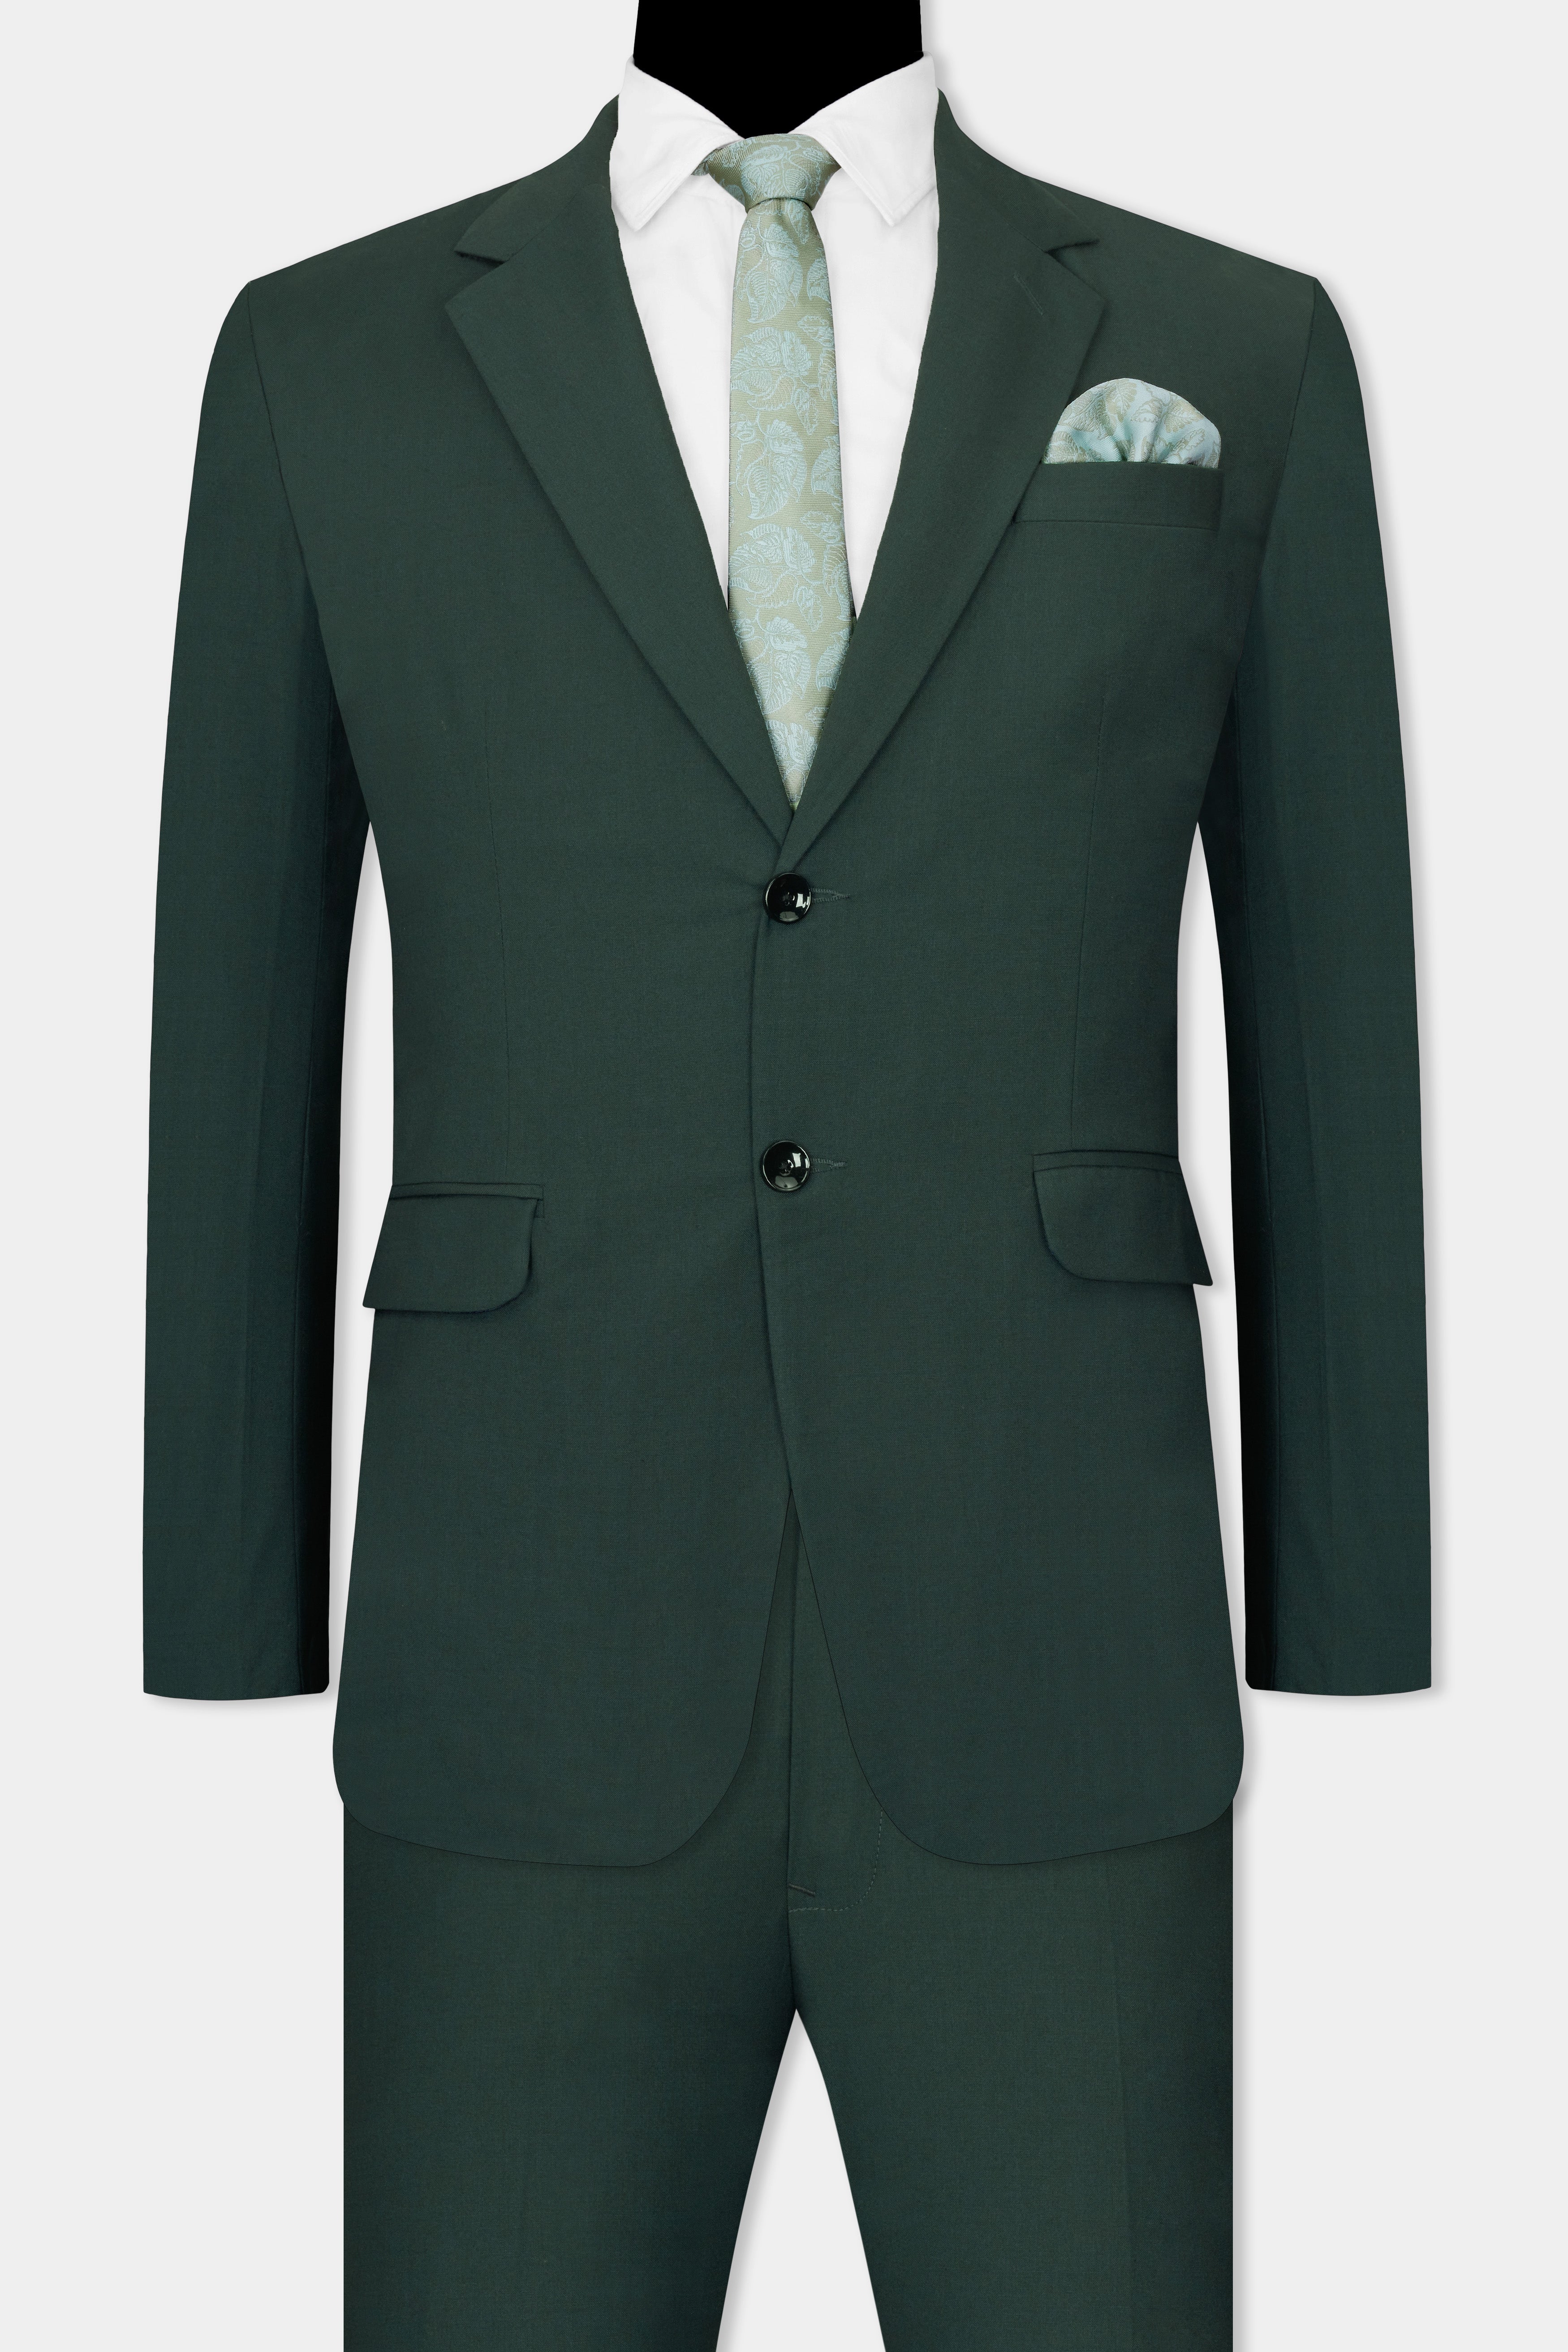 Gable Green Single Breasted Wool Rich Suit ST2728-SB-36,ST2728-SB-38,ST2728-SB-40,ST2728-SB-42,ST2728-SB-44,ST2728-SB-46,ST2728-SB-48,ST2728-SB-50,ST2728-SB-52,ST2728-SB-54,ST2728-SB-56,ST2728-SB-58,ST2728-SB-60